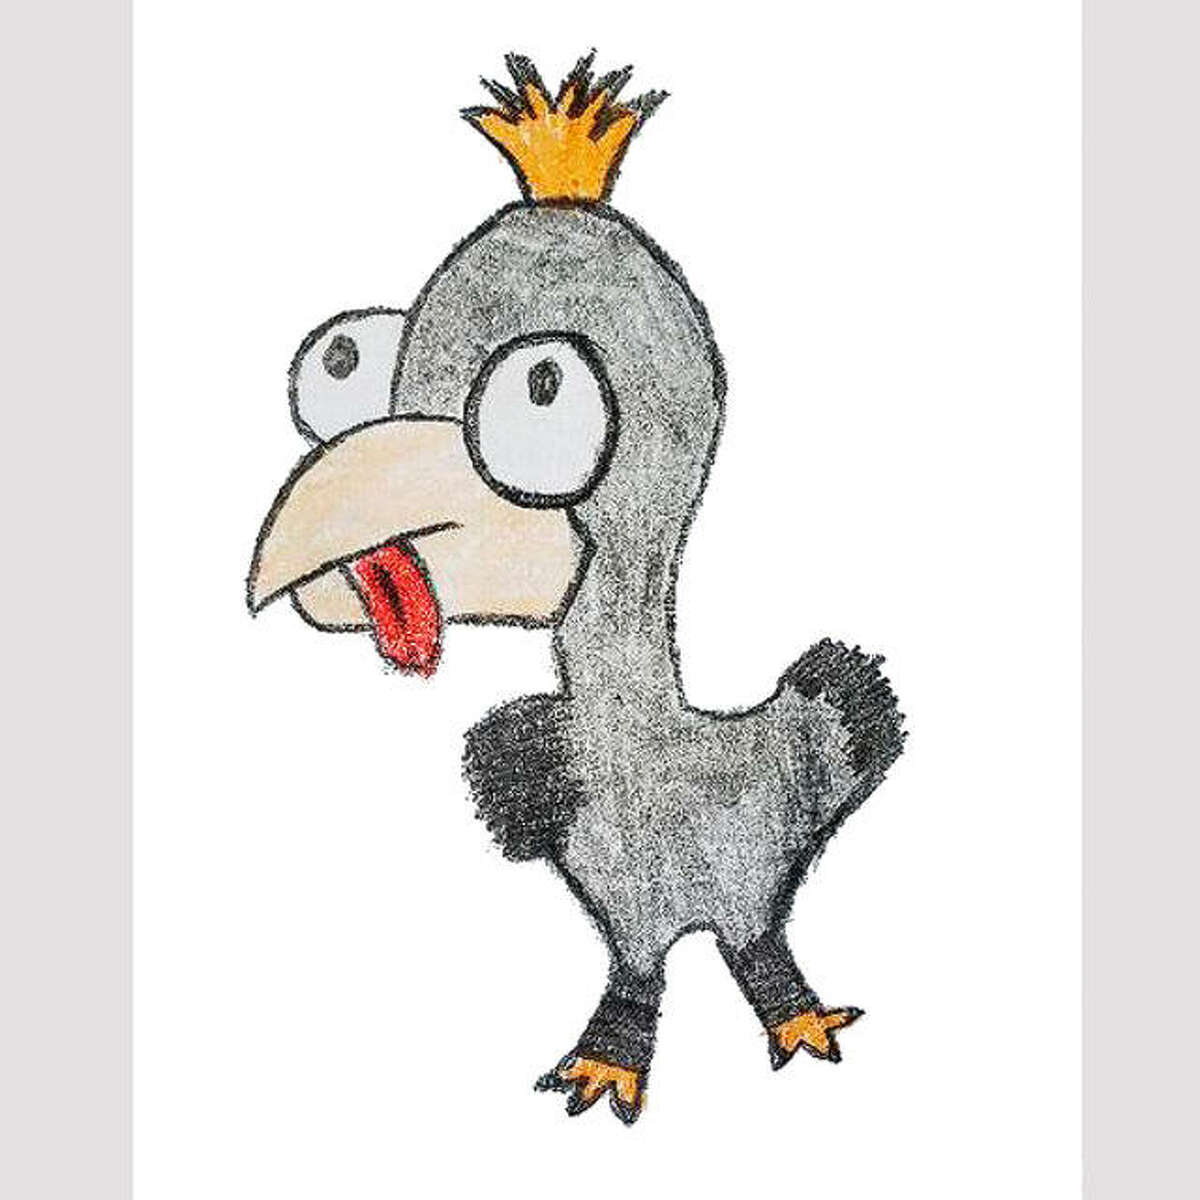 A two-dimensional drawing of Kevin the Bird.